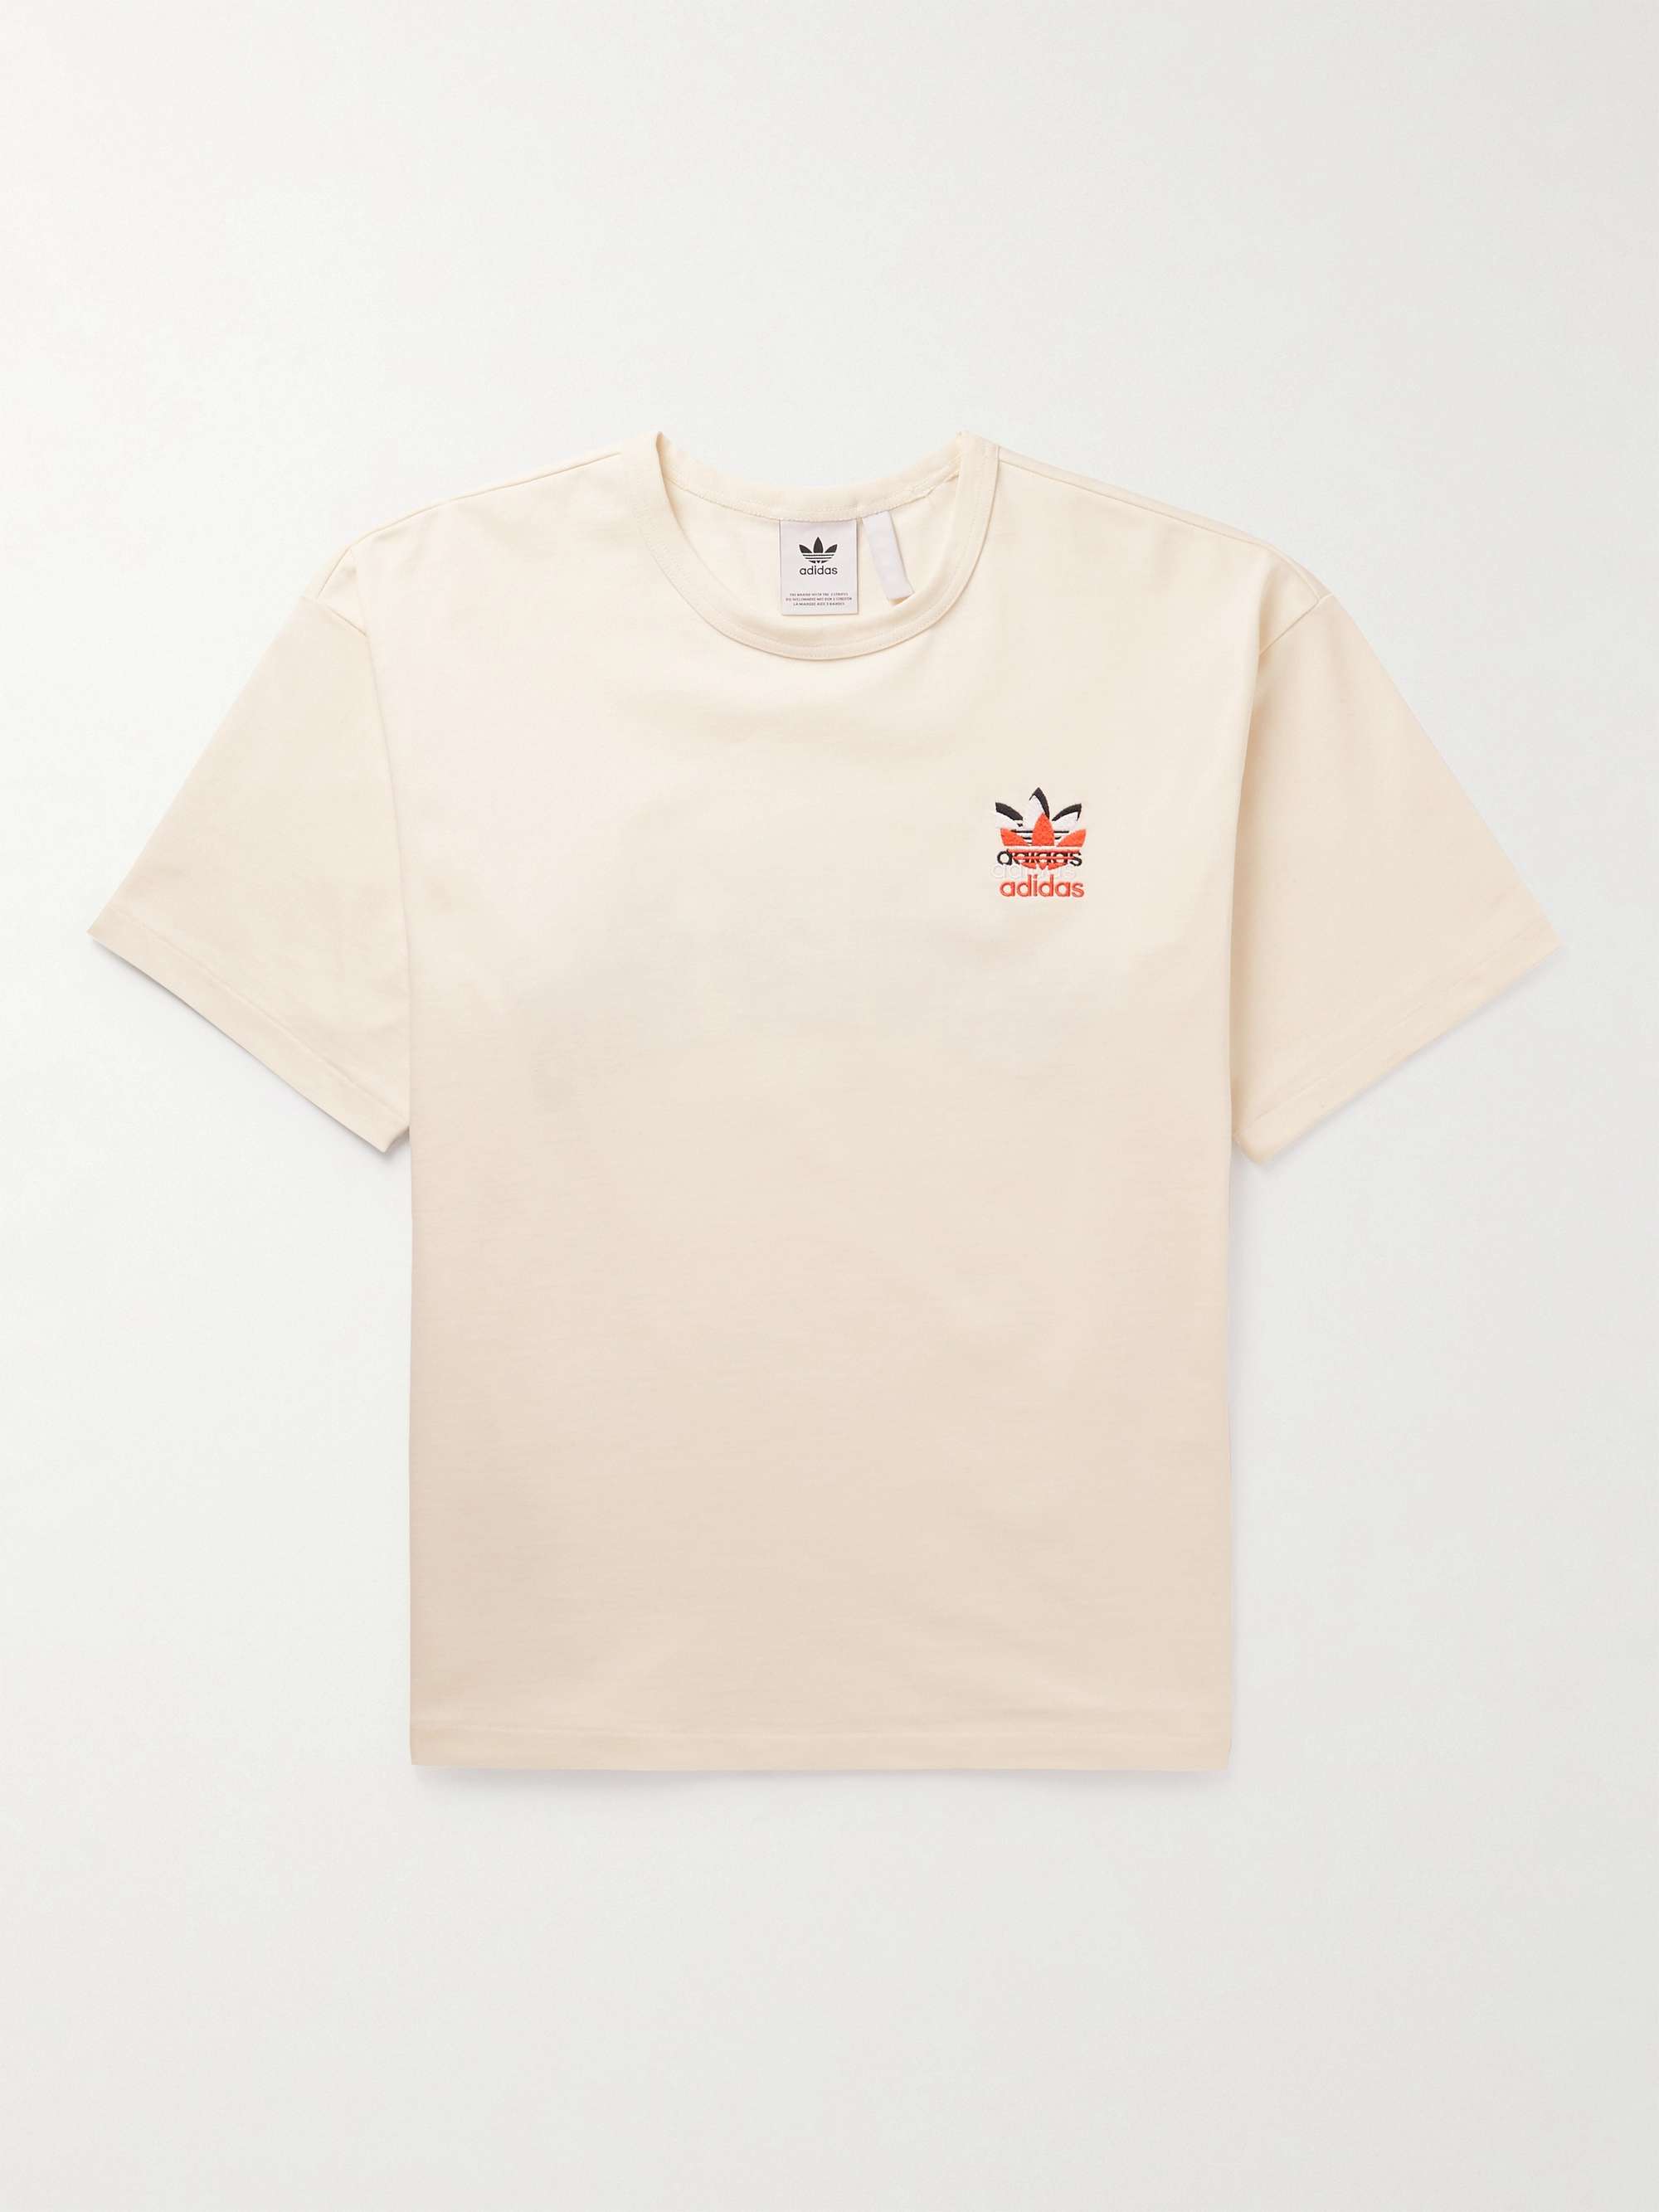 ADIDAS CONSORTIUM + Midwest Kids Logo-Embroidered Cotton-Jersey T-Shirt